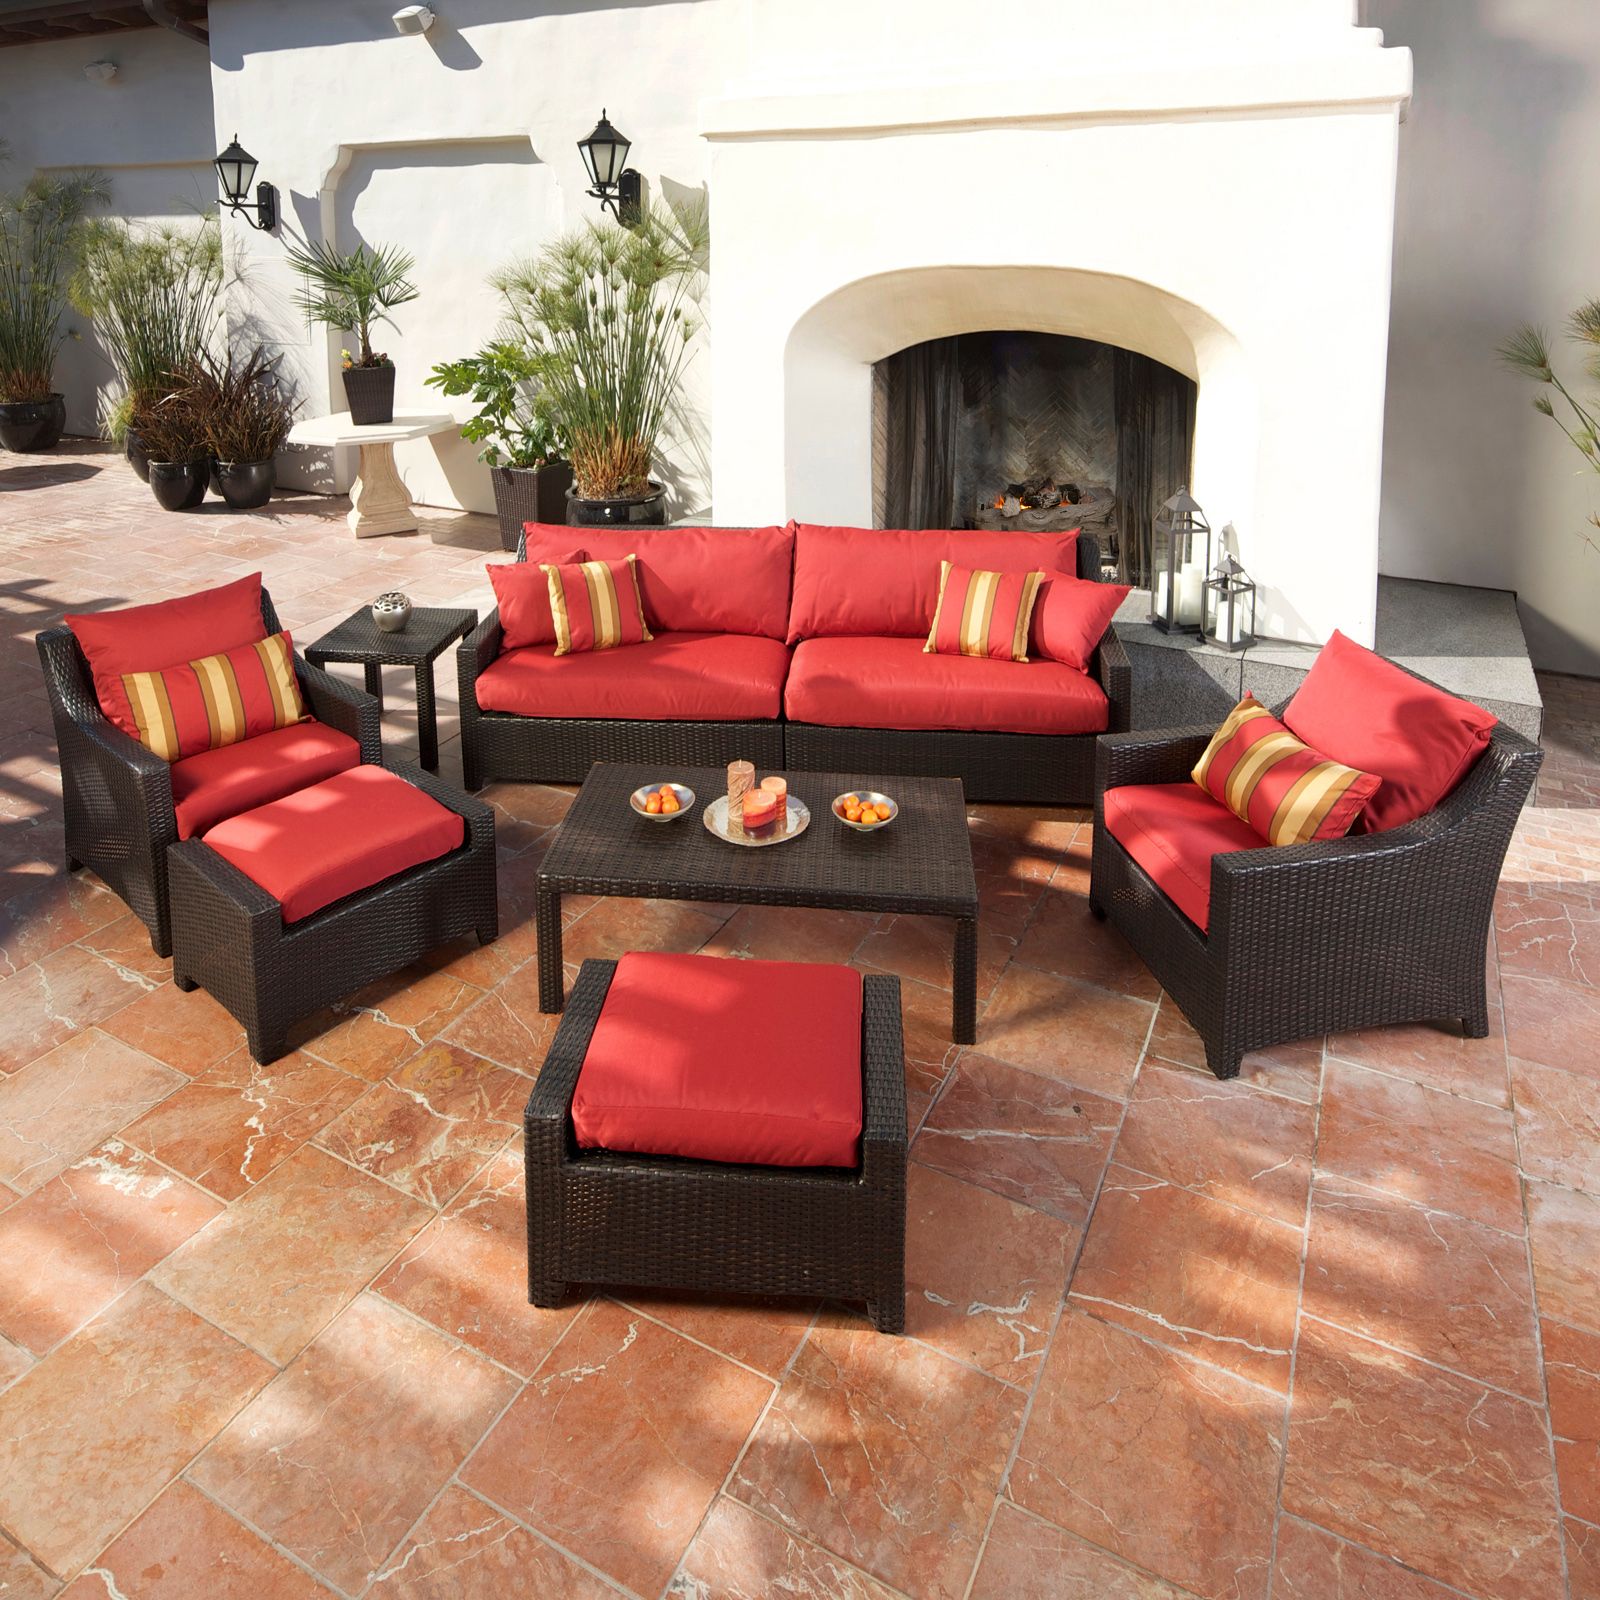 Rst Outdoor Cantina 8 Piece Sofa With Club Chair And Ottomans Set Inside 2020 Red Loveseat Outdoor Conversation Sets (View 9 of 15)